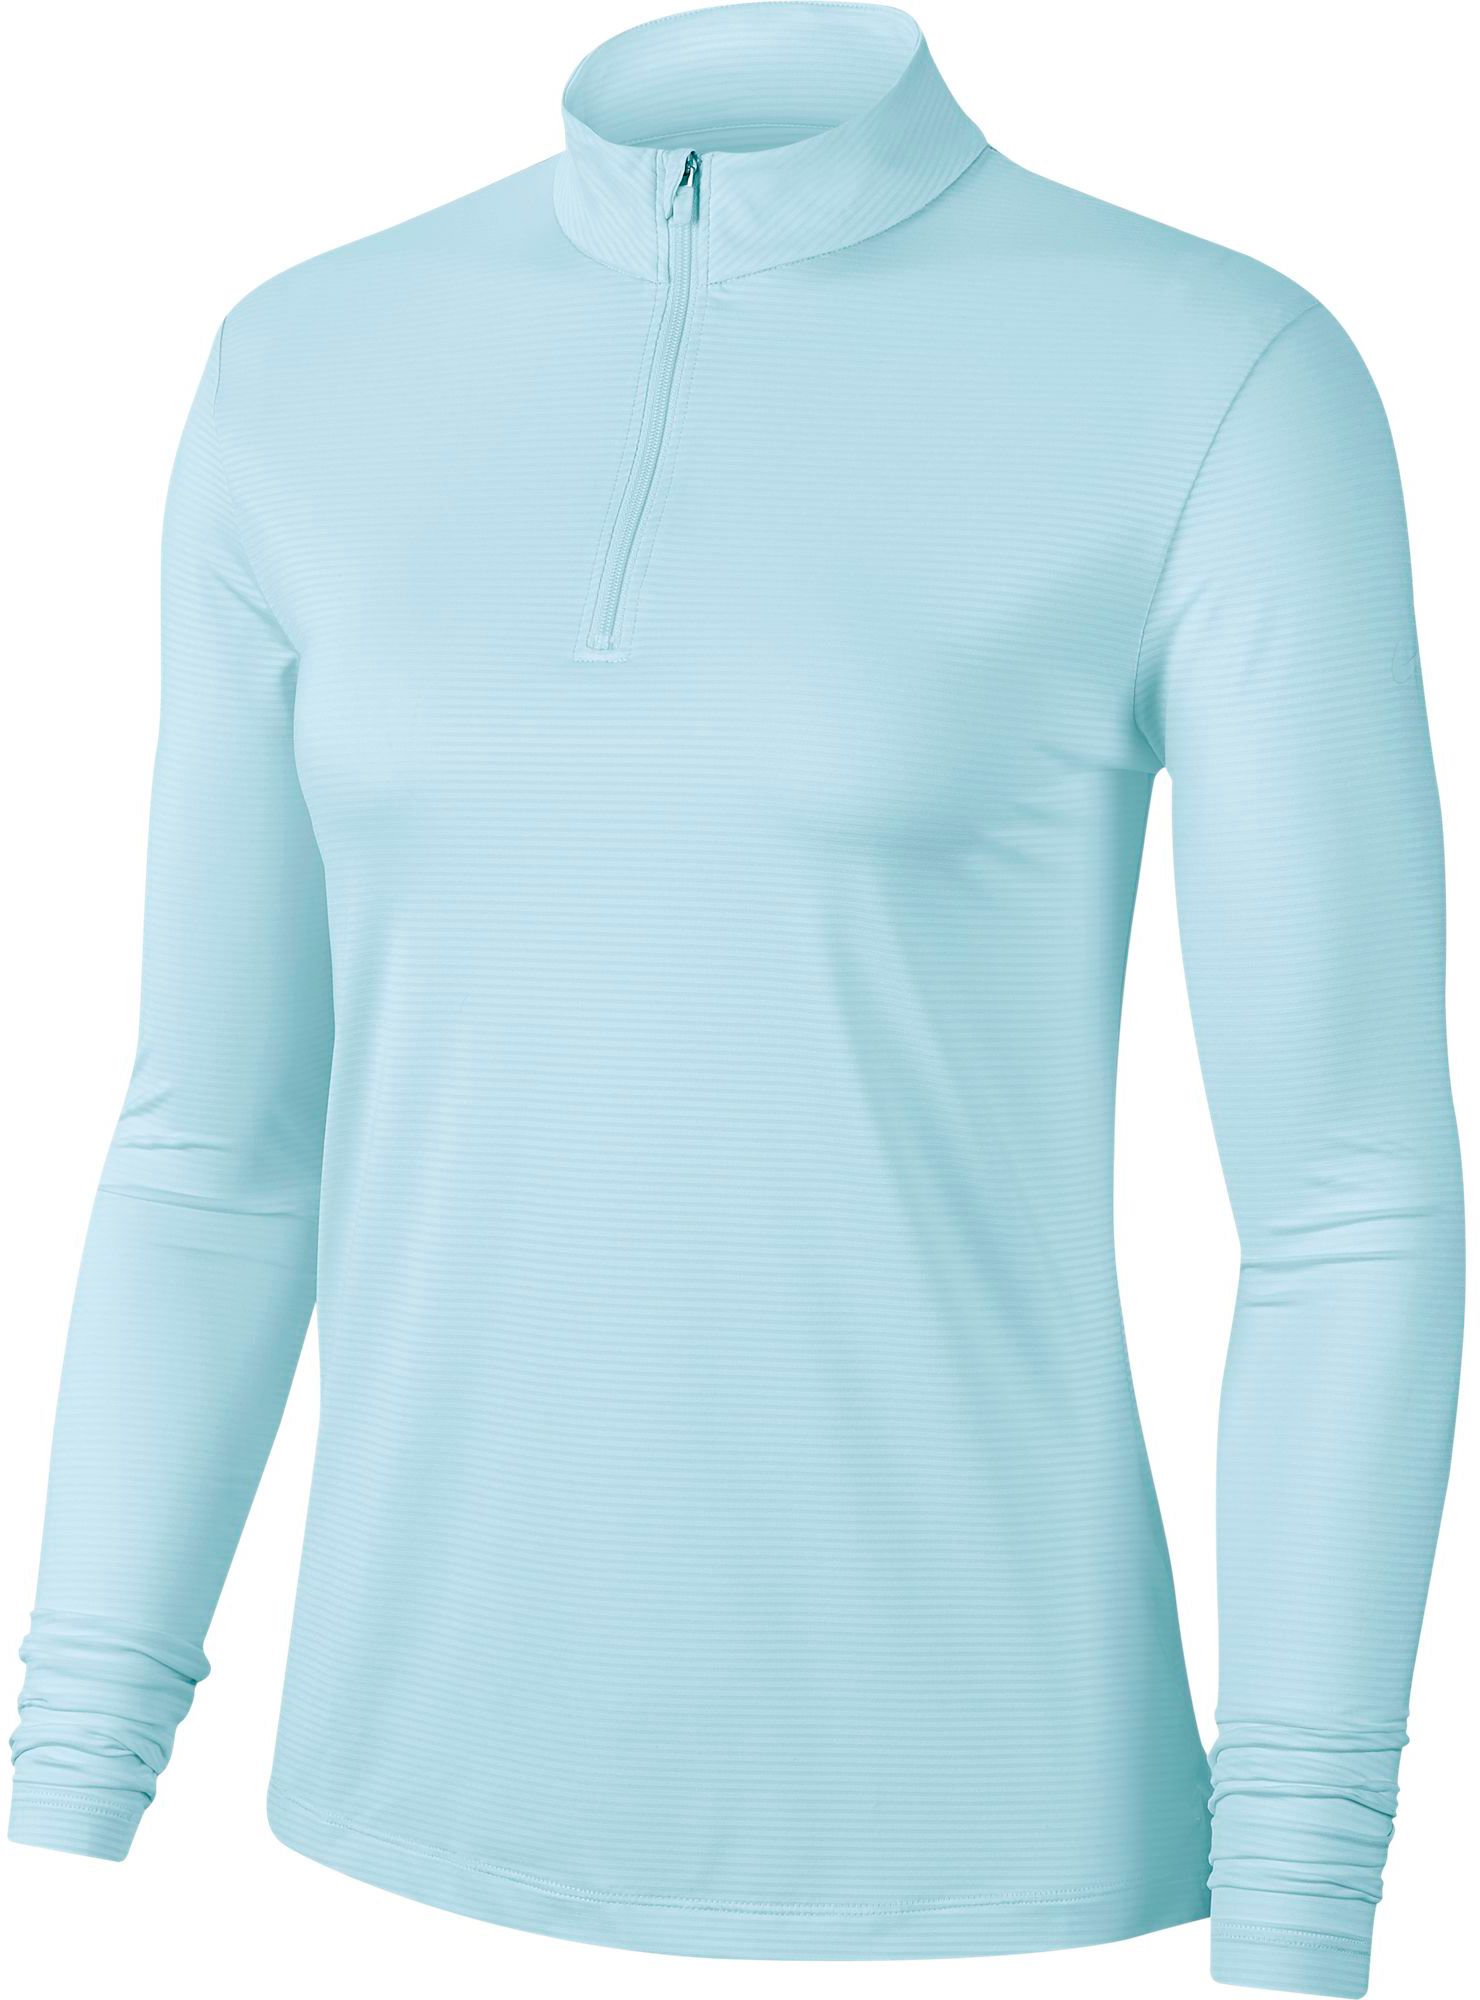 Women's Golf Sweaters & Pullovers | Curbside Pickup Available at DICK'S